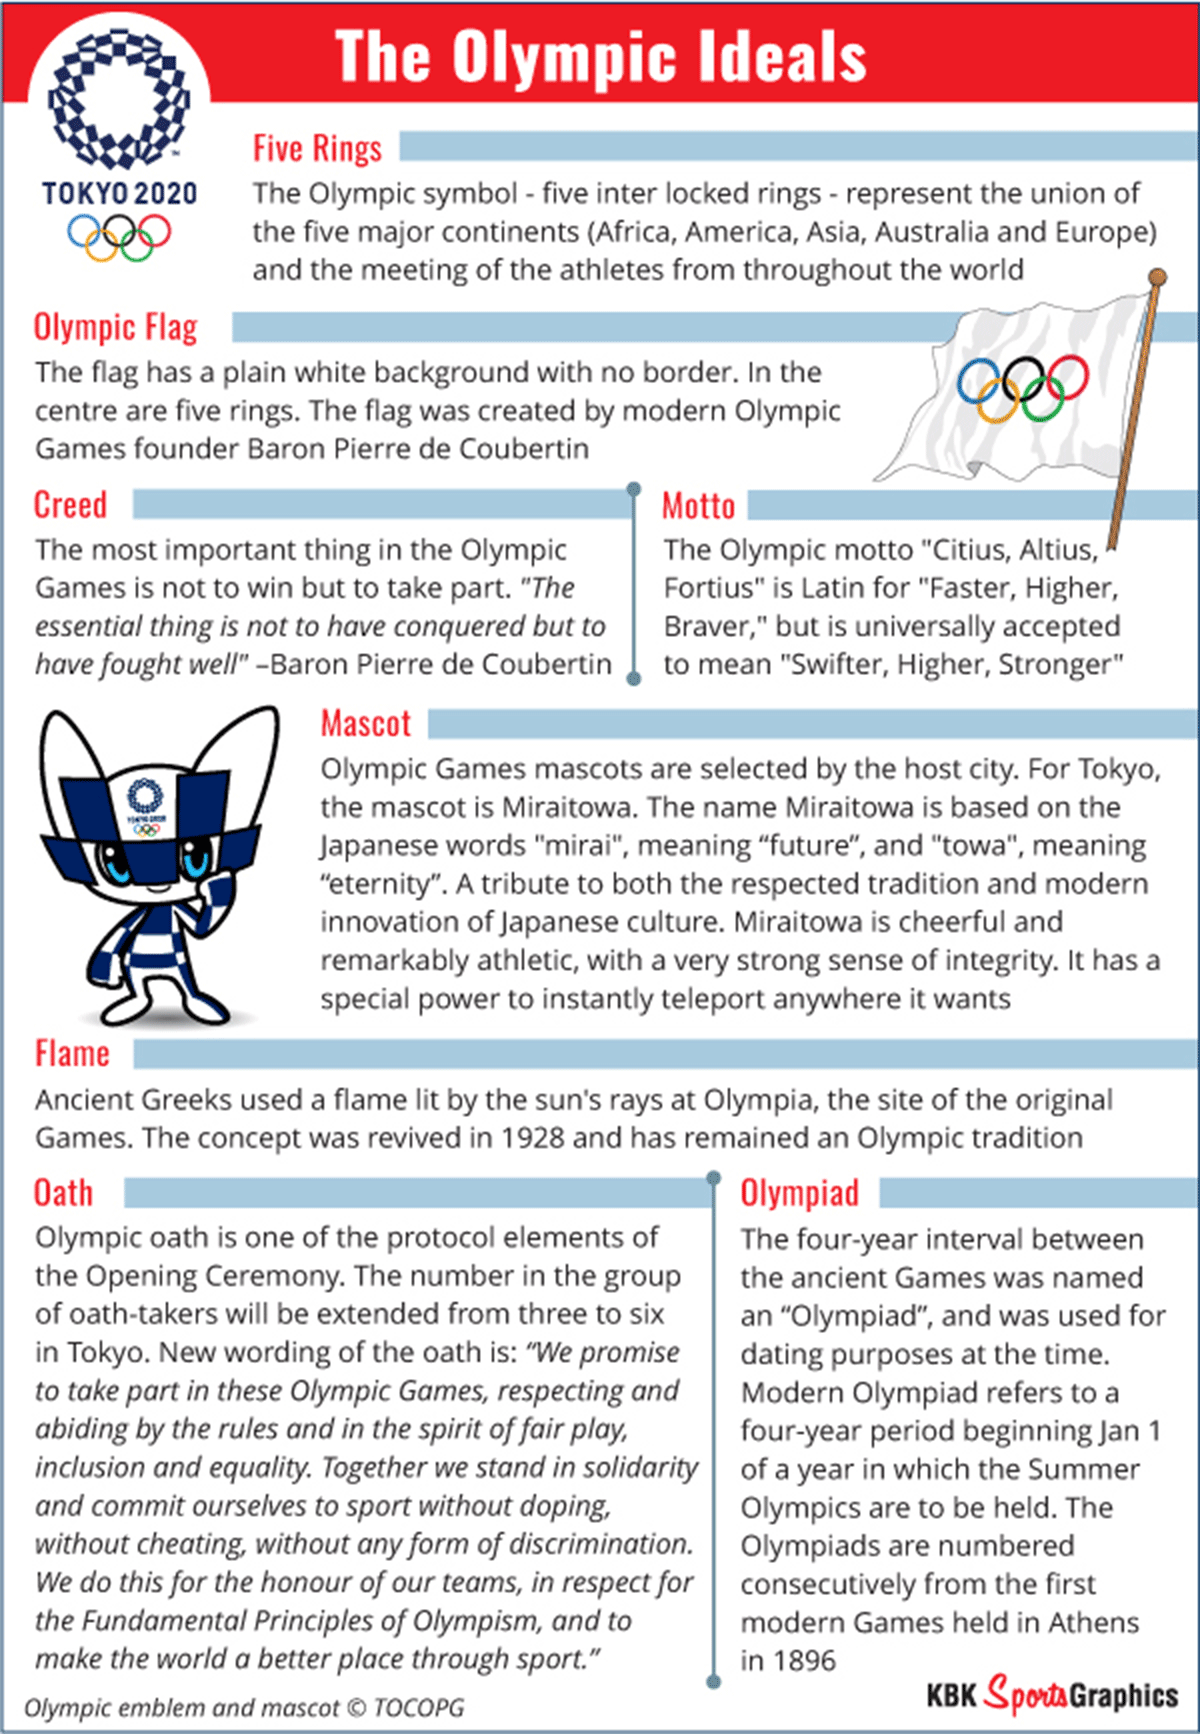 The Olympic Ideals